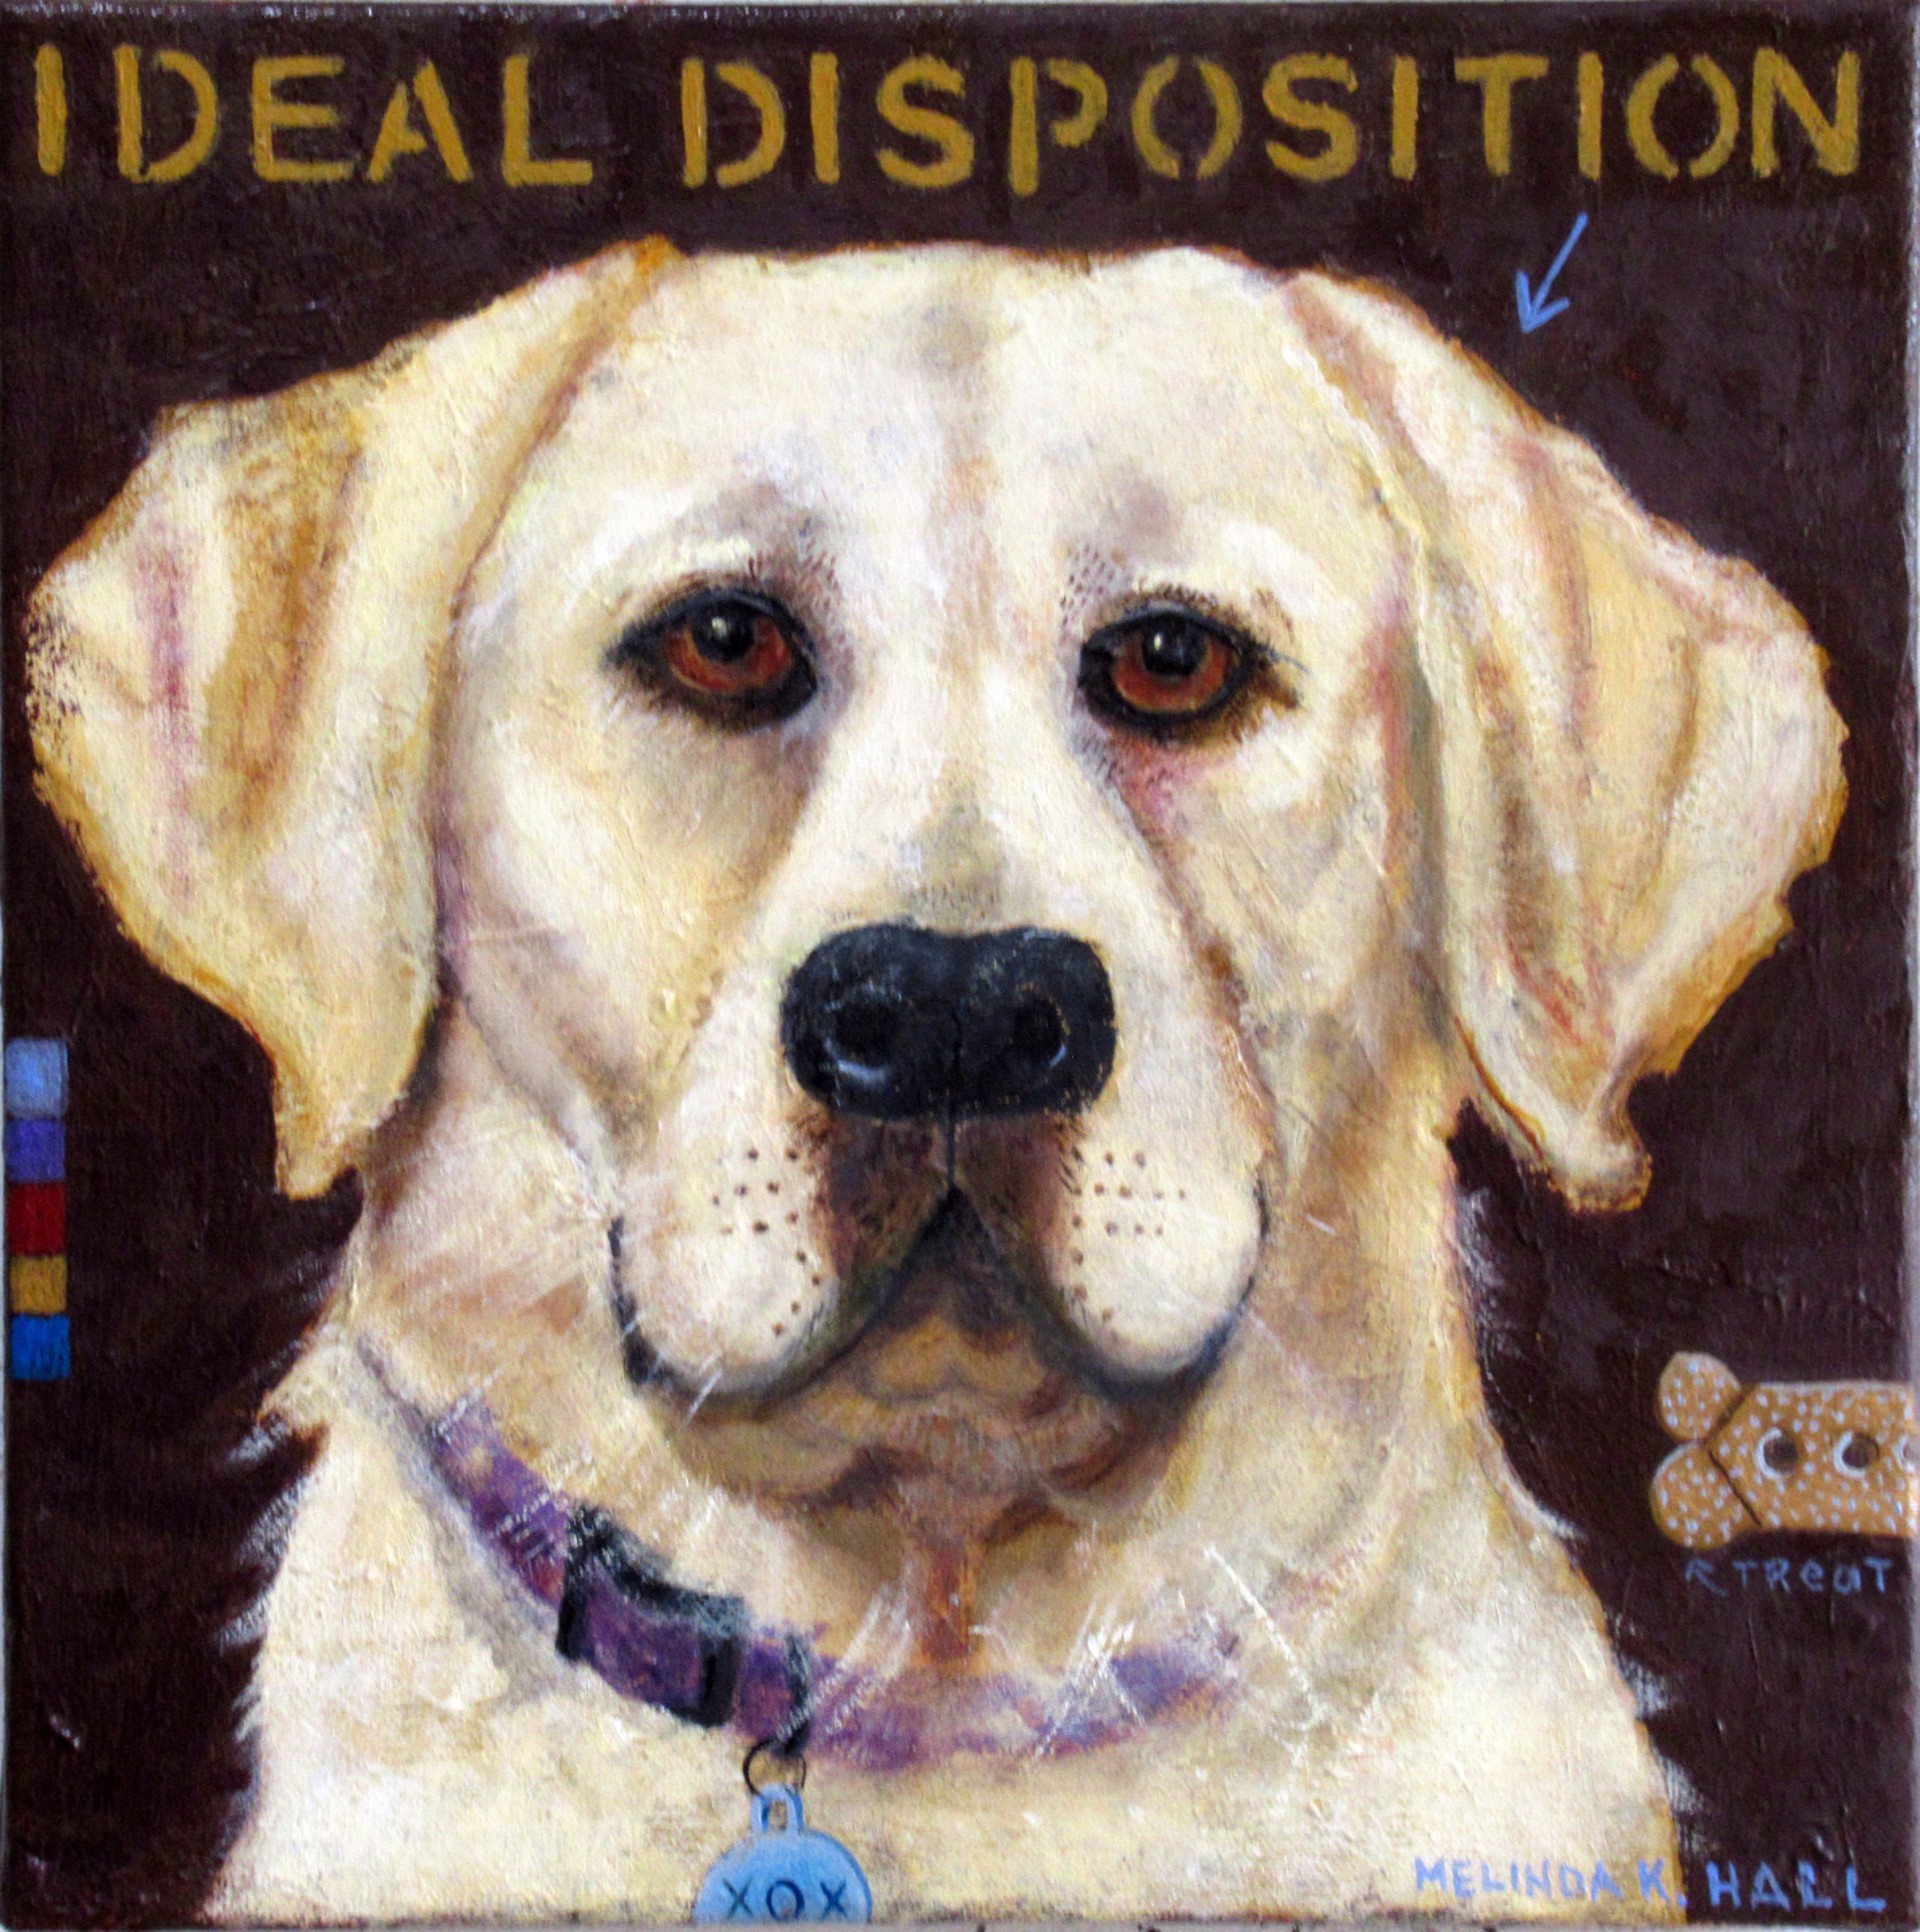 Ideal Disposition by Melinda K. Hall